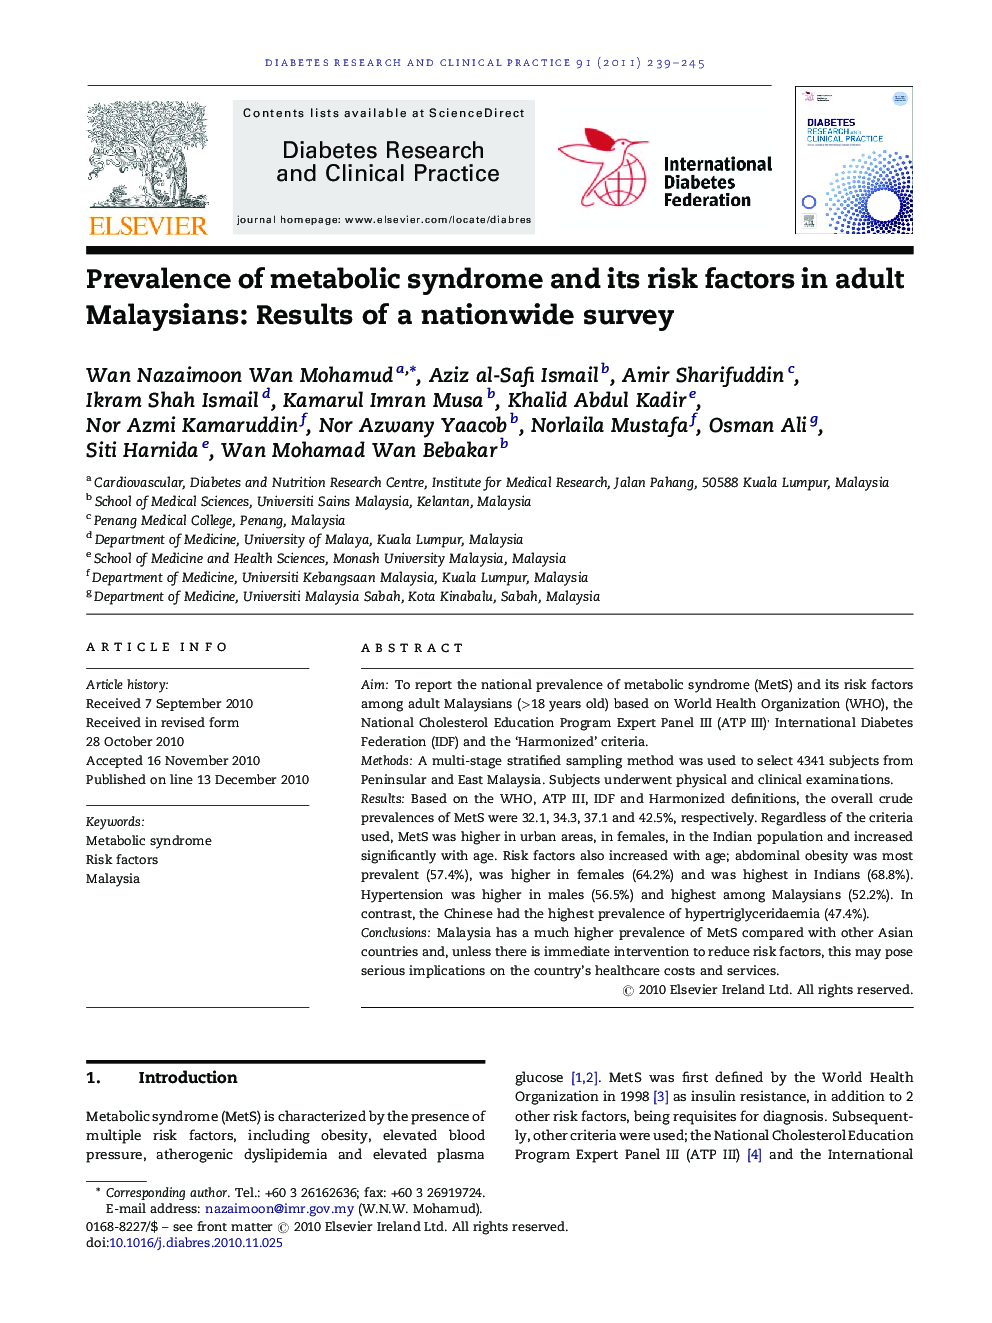 Prevalence of metabolic syndrome and its risk factors in adult Malaysians: Results of a nationwide survey